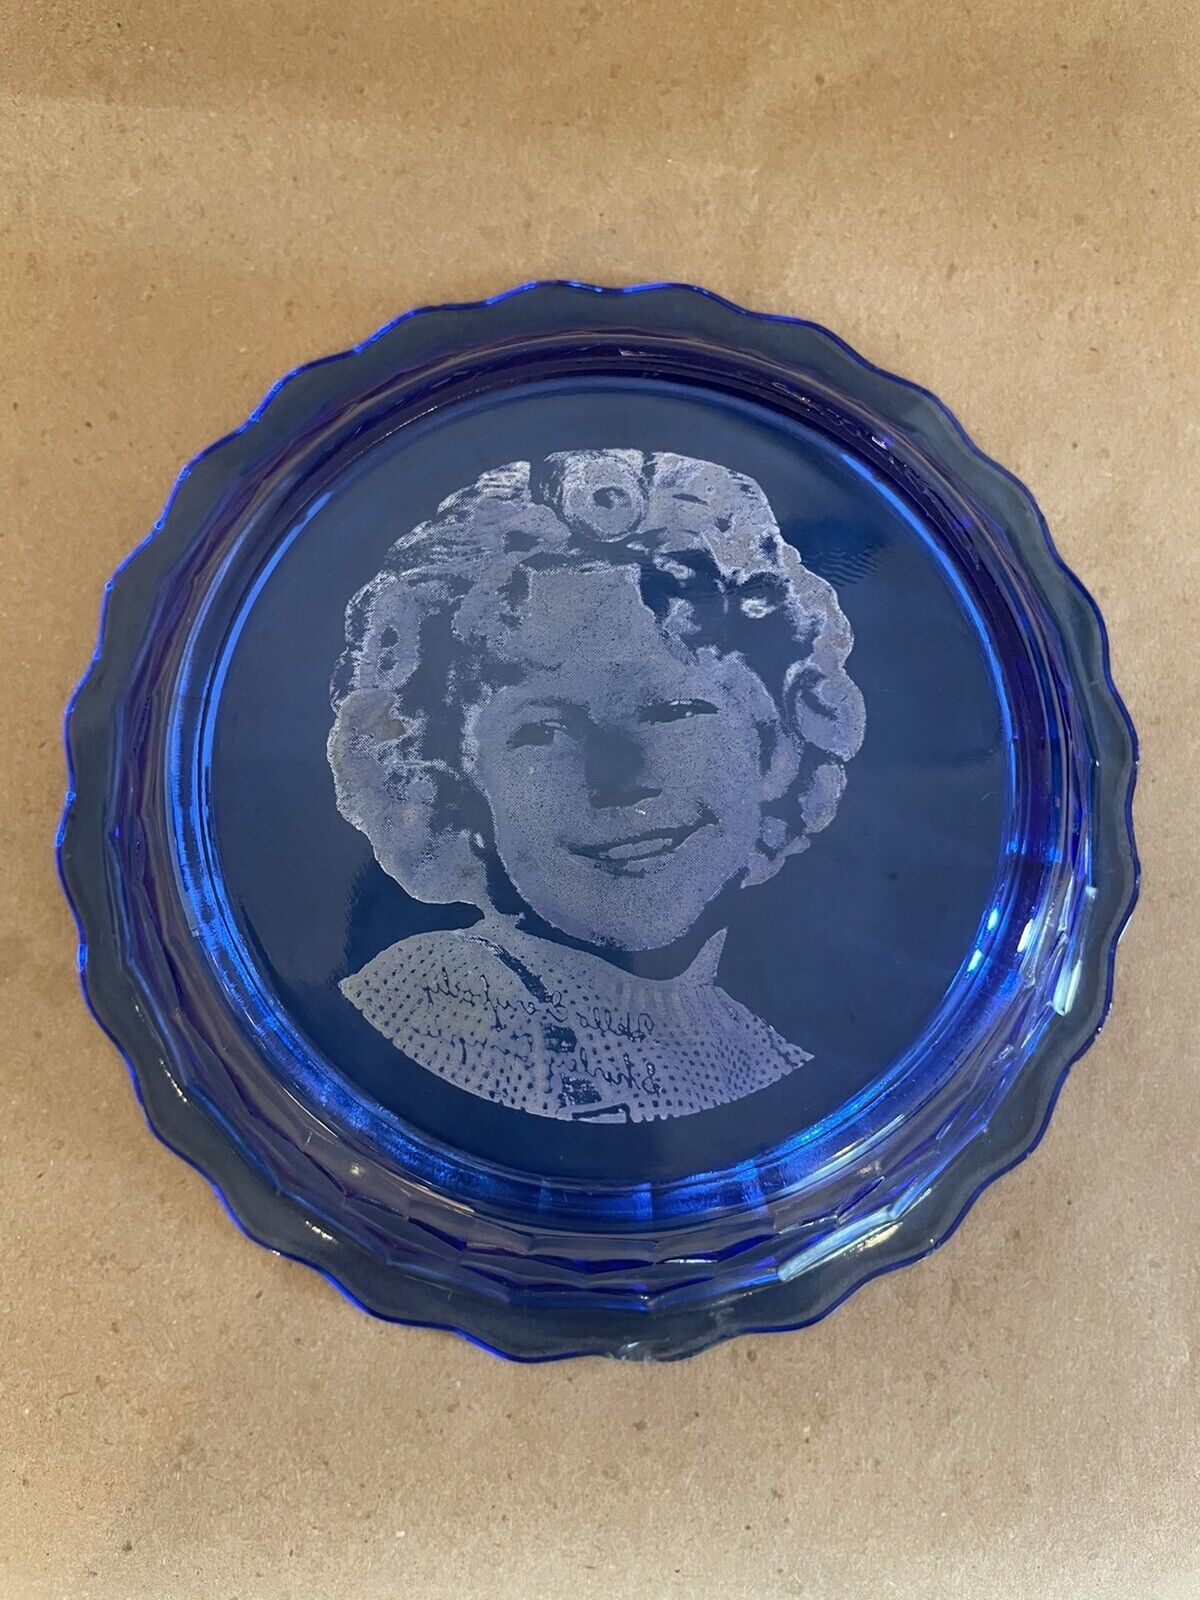 Cobalt Blue Bowl with The Image of Shirley Temple on The Bottom Collectible